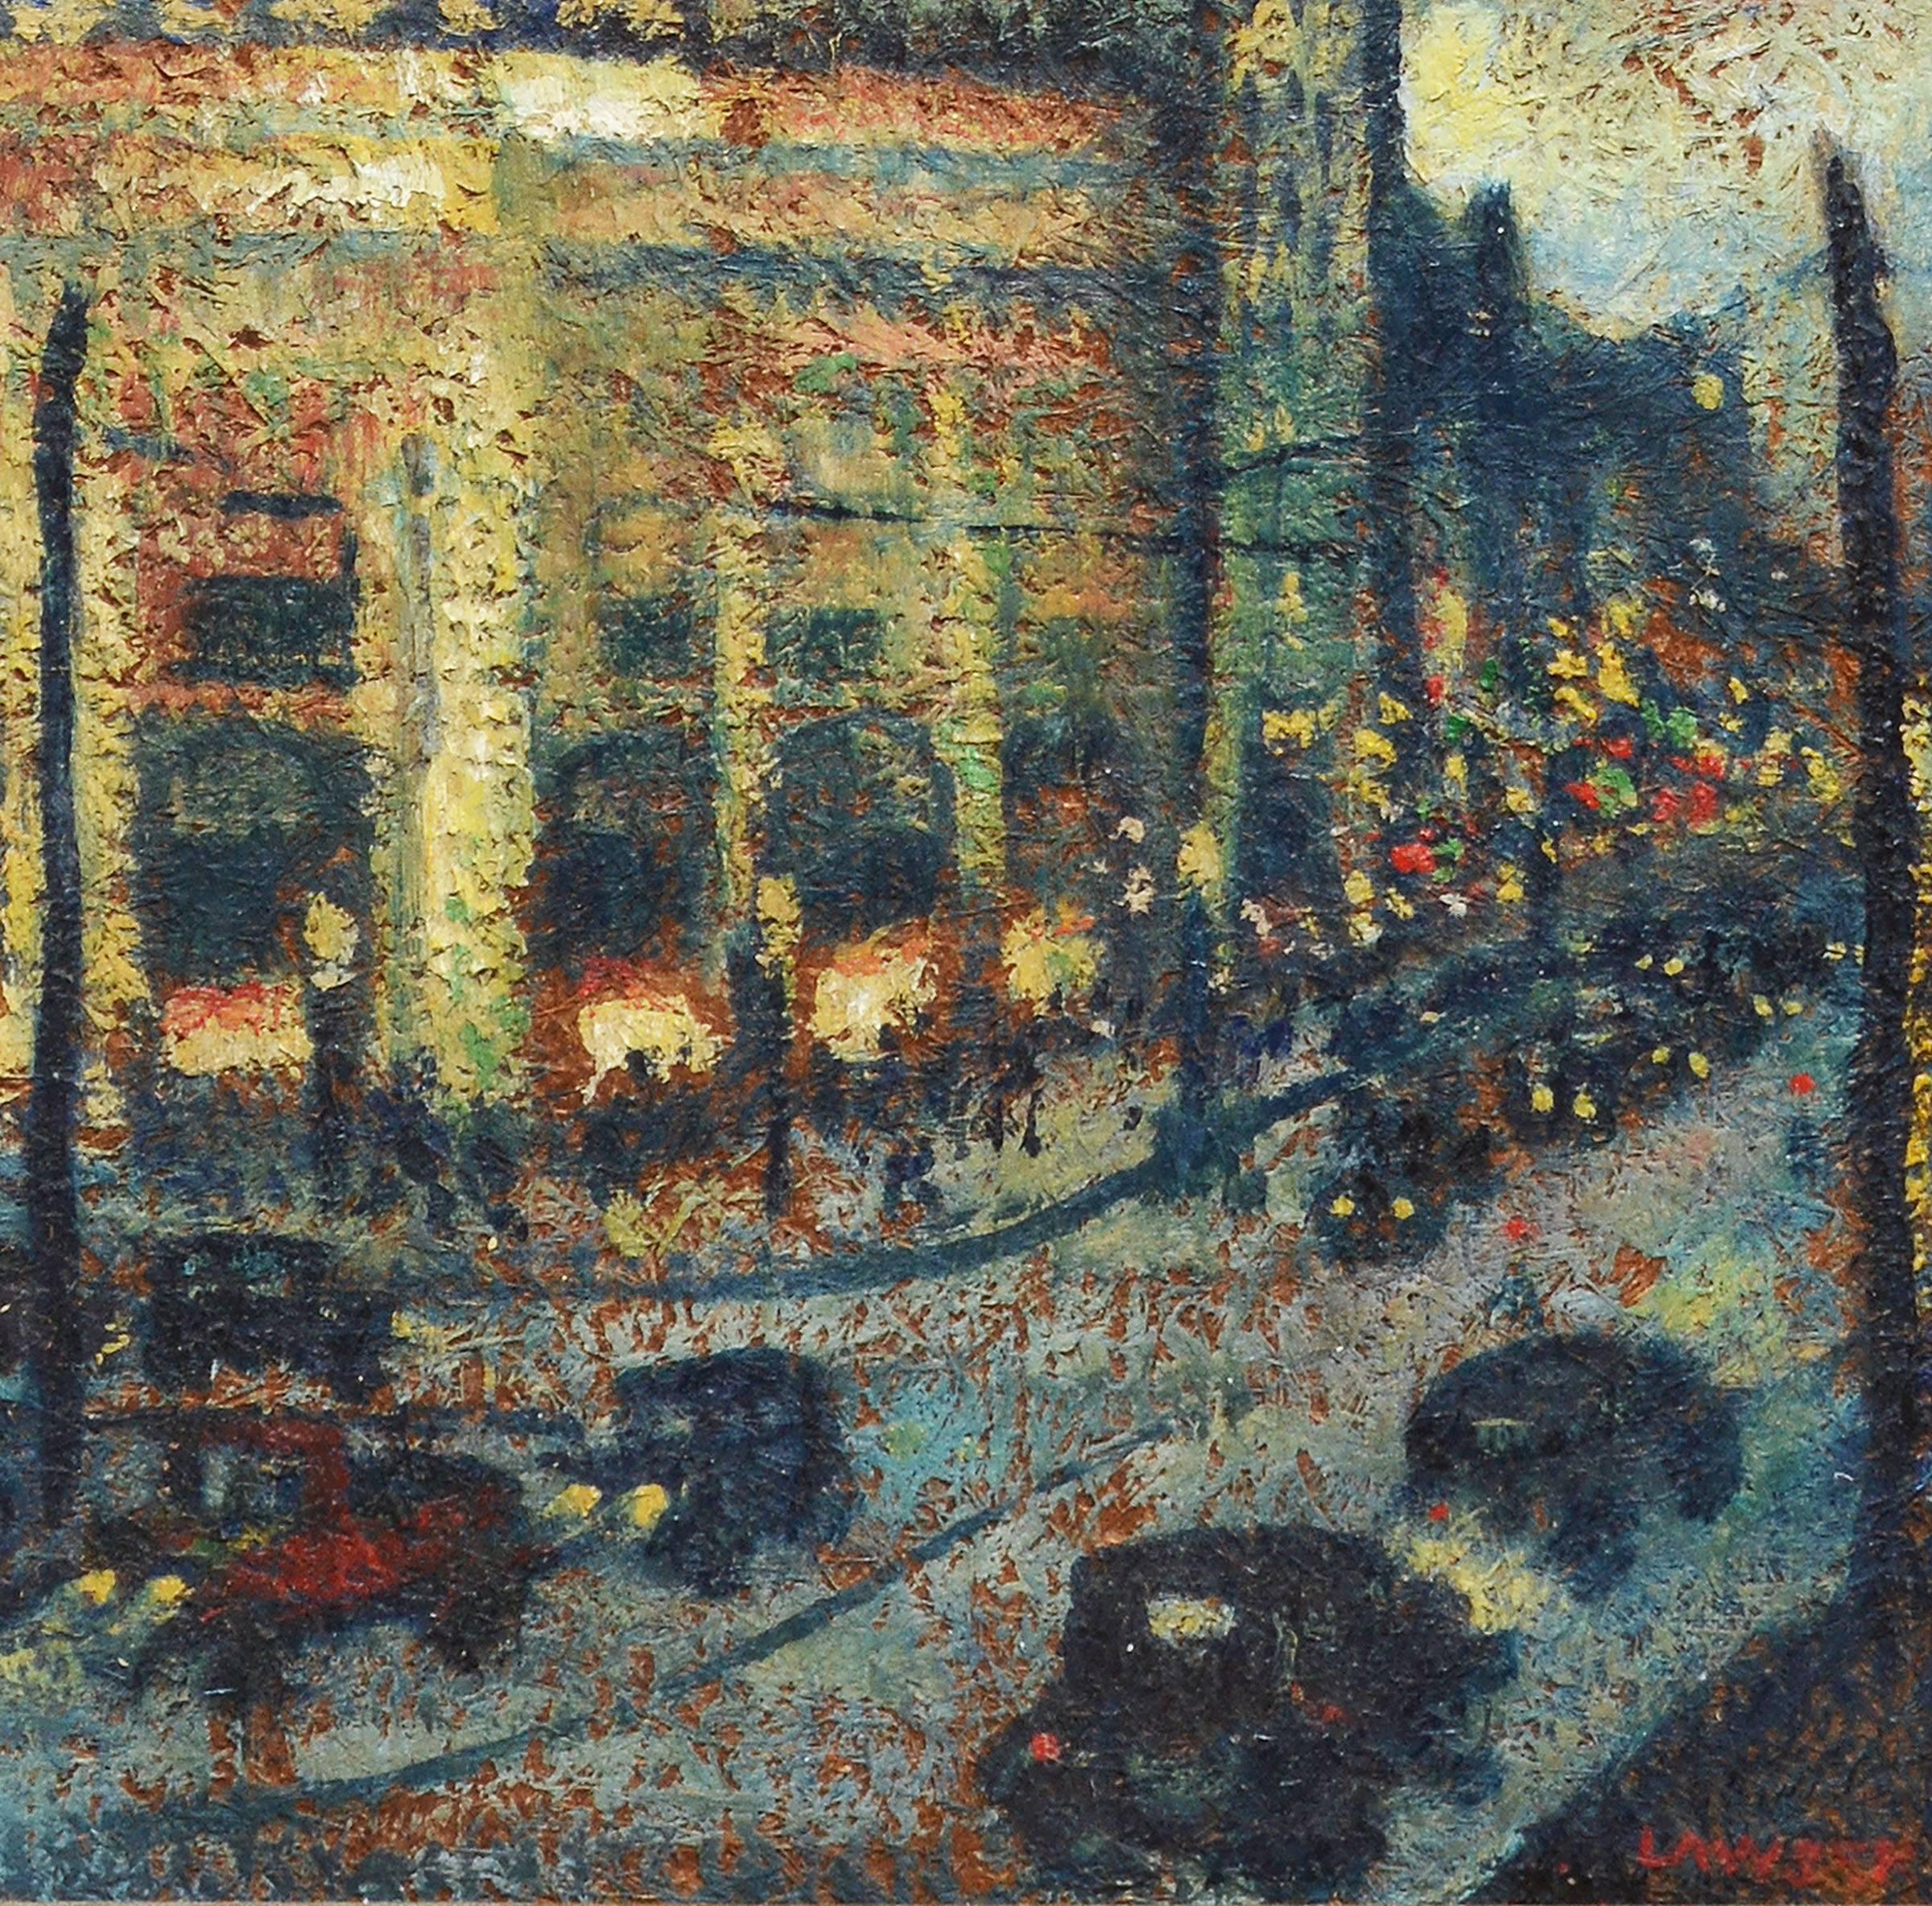 Ashcan School Cityscape View of a Busy New York Street at Night - Brown Landscape Painting by Unknown